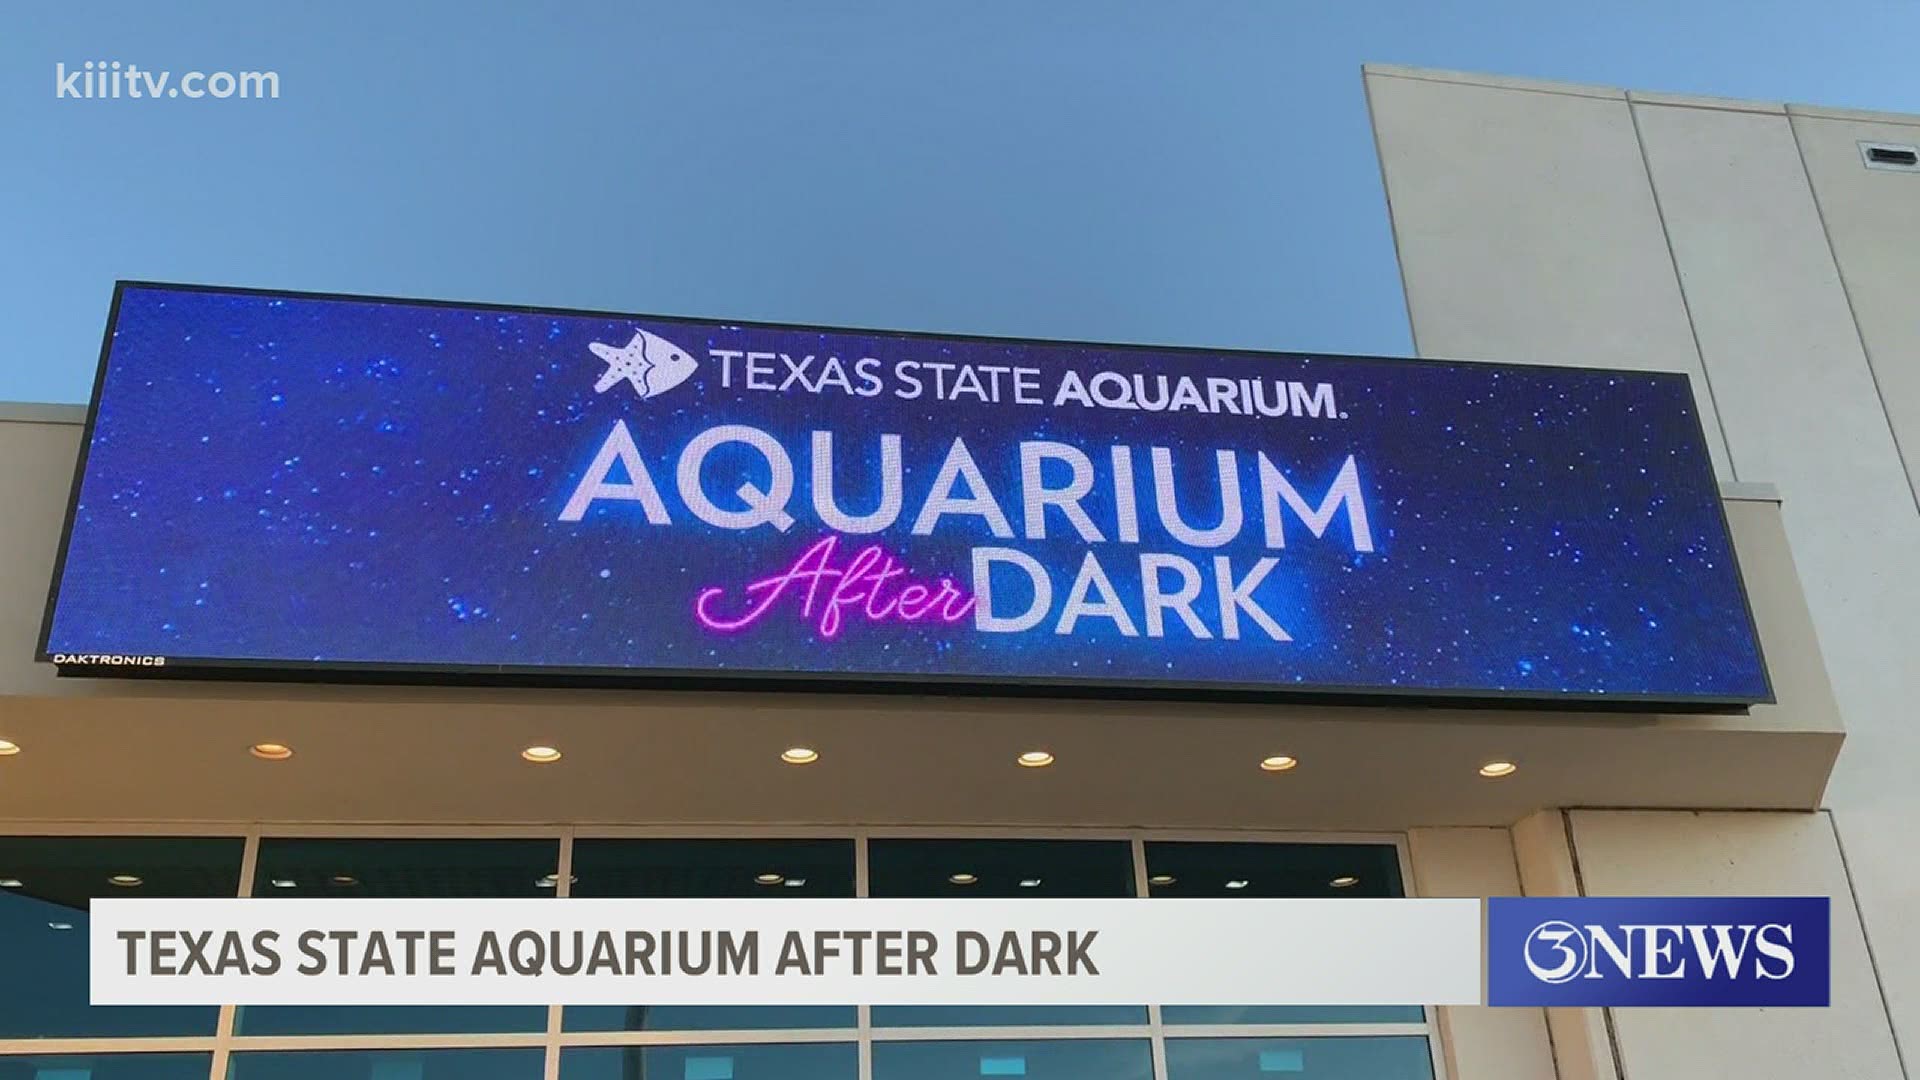 It's a chance to check out the South Texas sunset and experience the attractions at the aquarium.